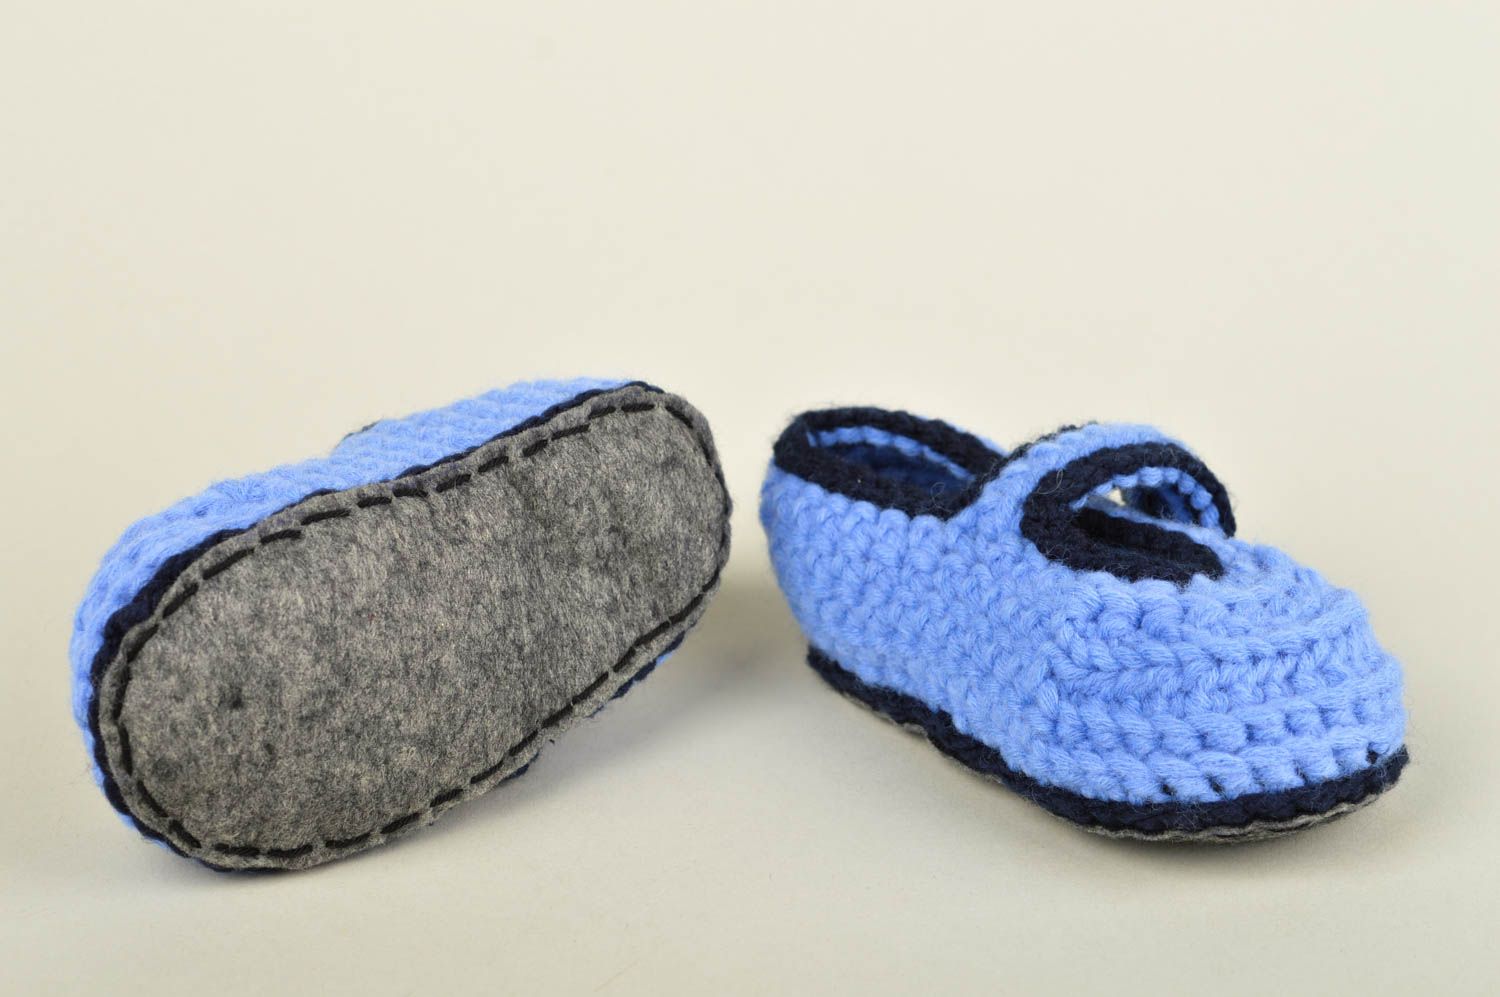 Handmade crocheted baby bootees designer blue baby bootees shoes for boys photo 2